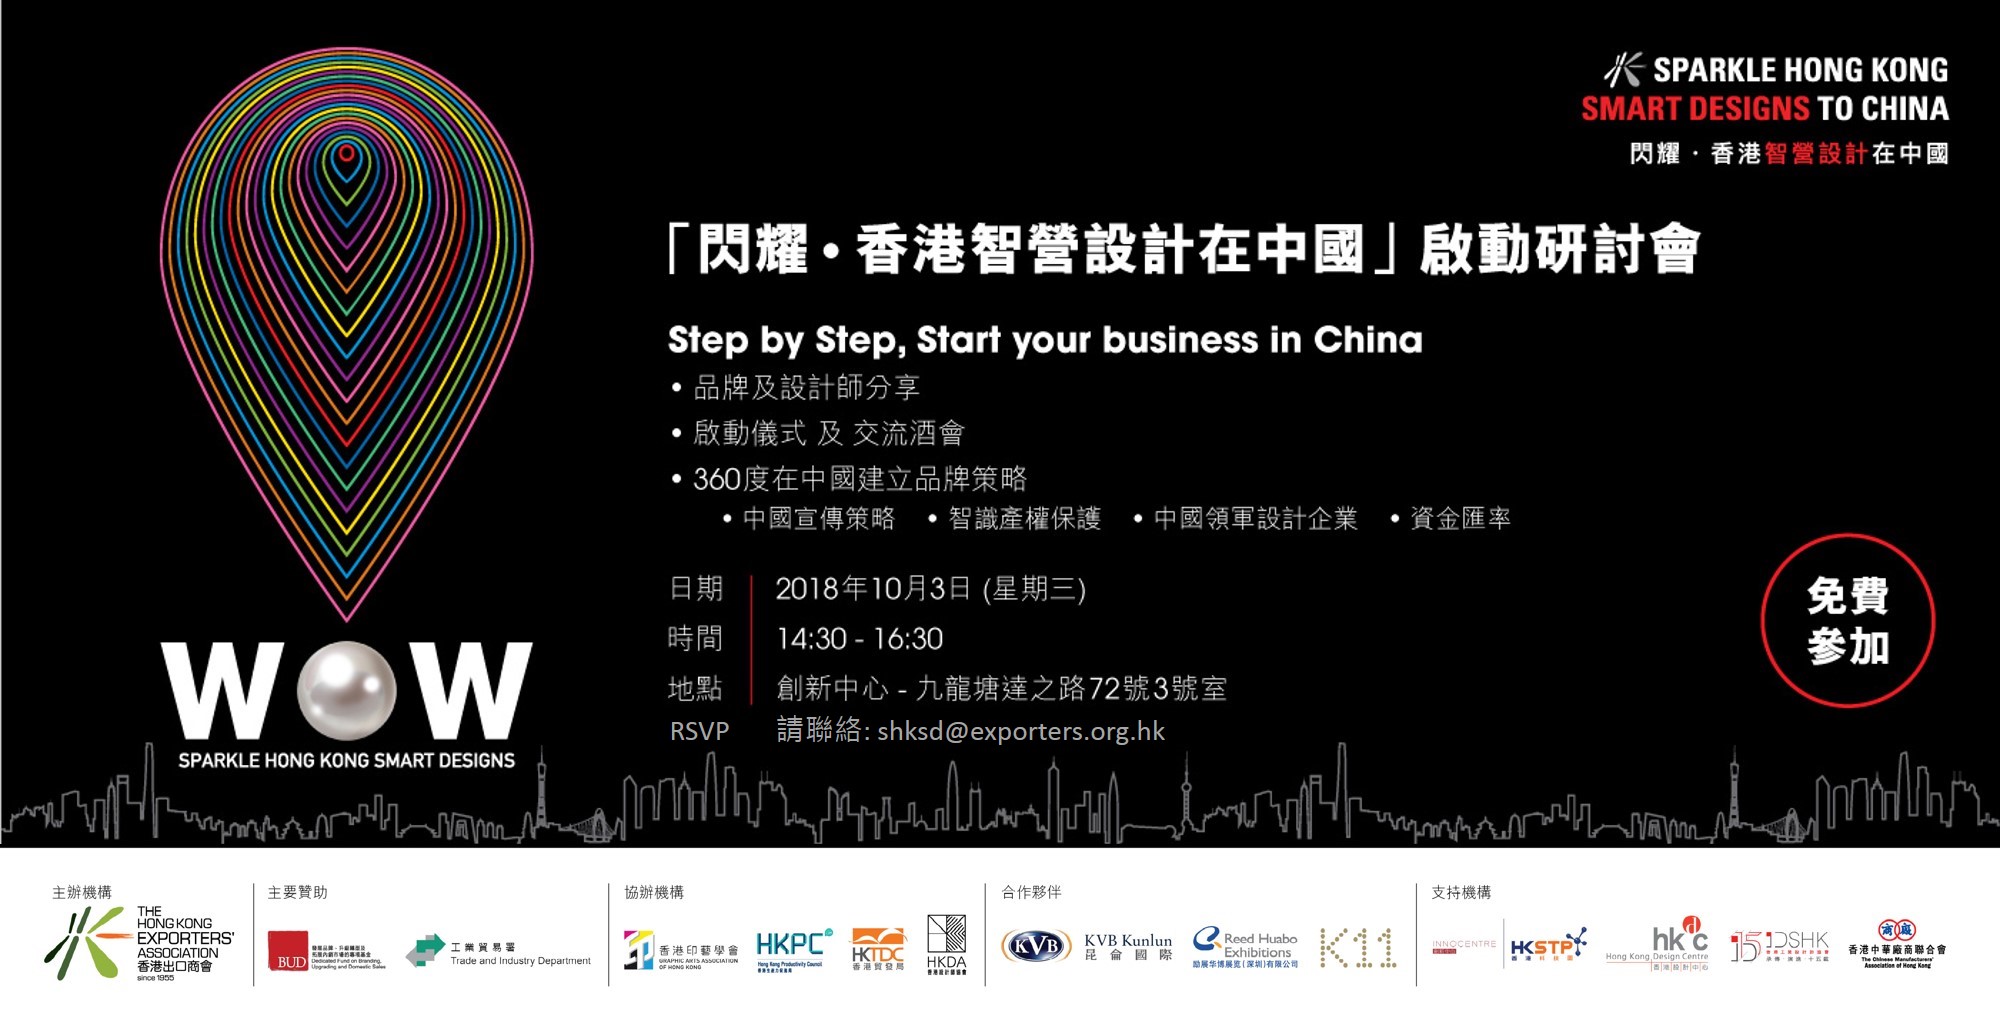 Supporting Event - 1st edition “SPARKLE HONG KONG SMART DESIGNS TO CHINA” Kick Off Seminar